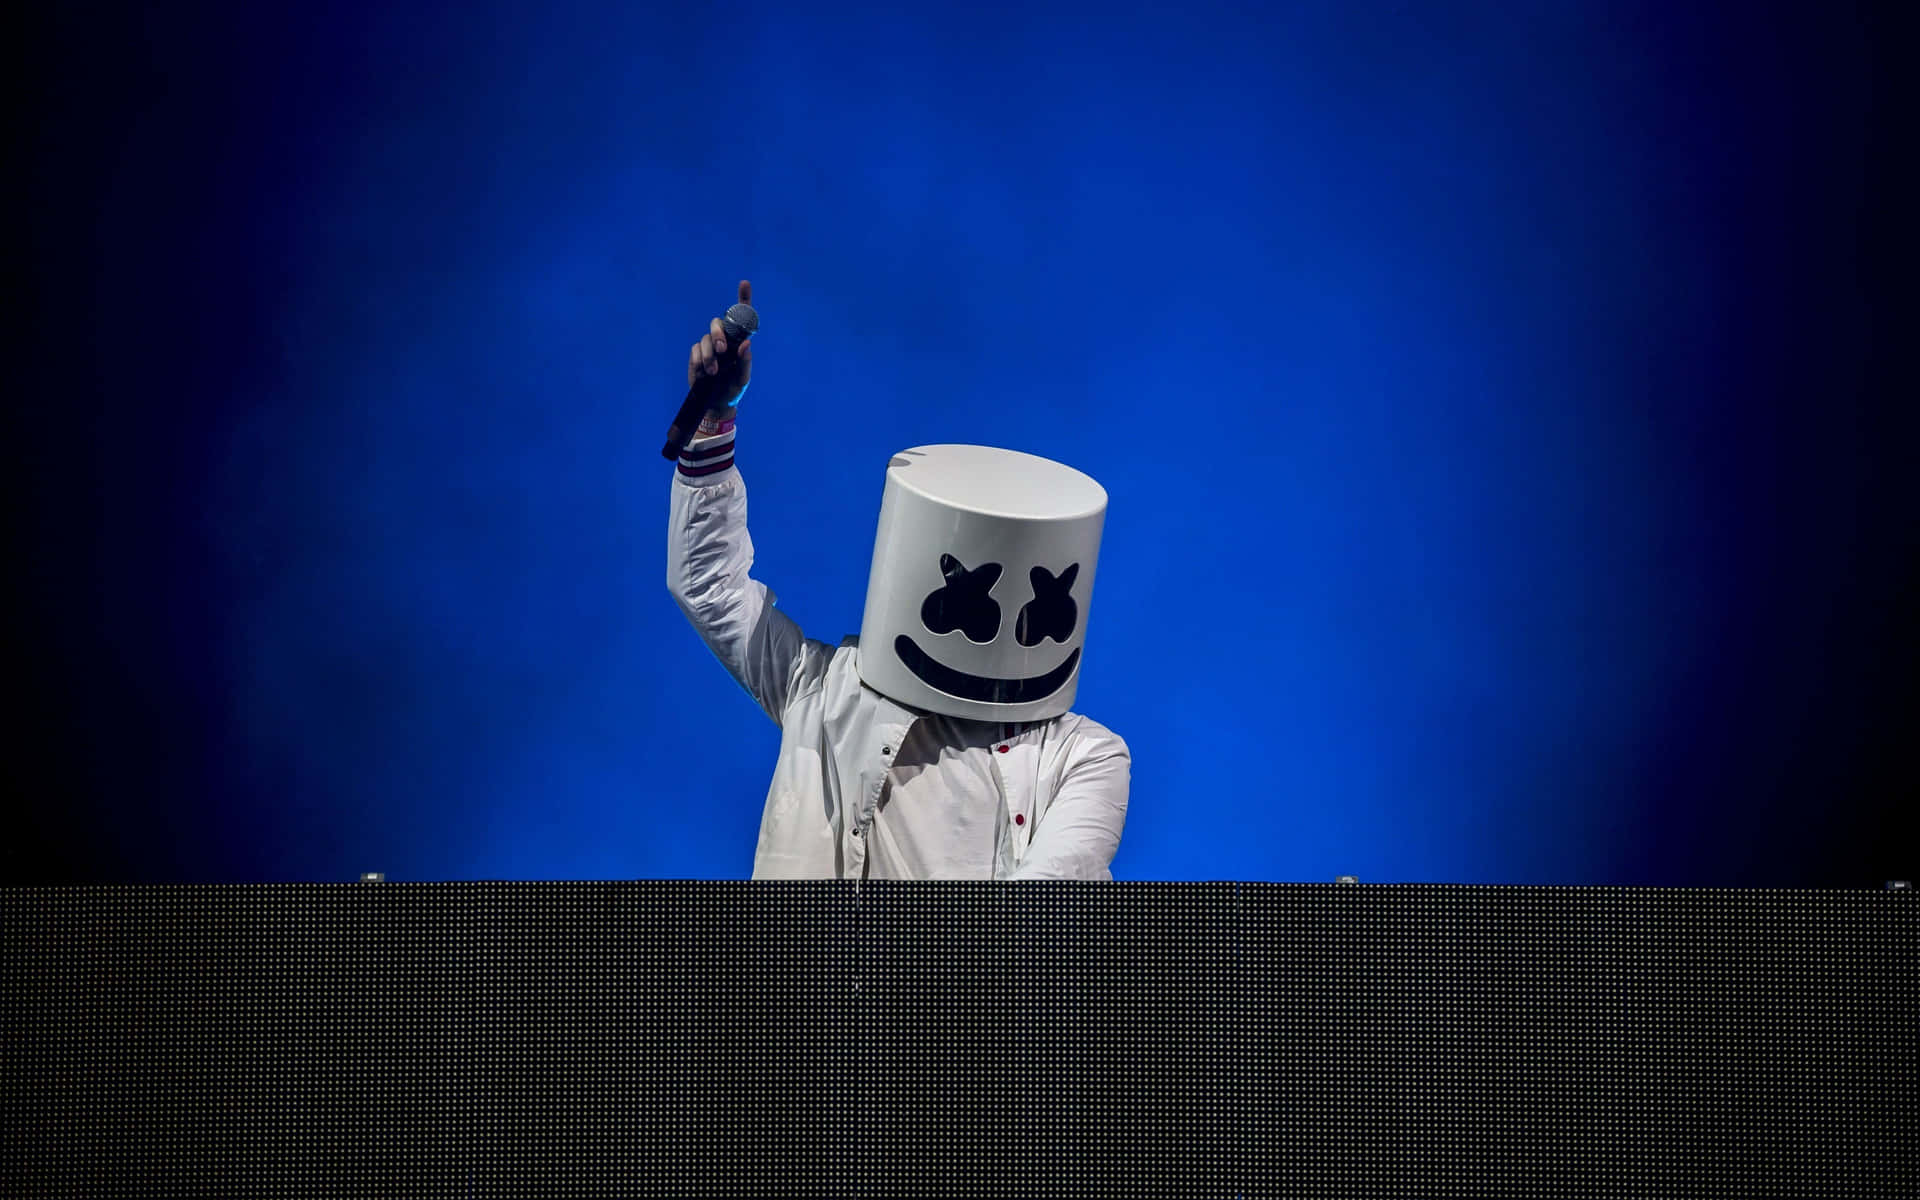 Experience EDM's global superstardom with Marshmello.